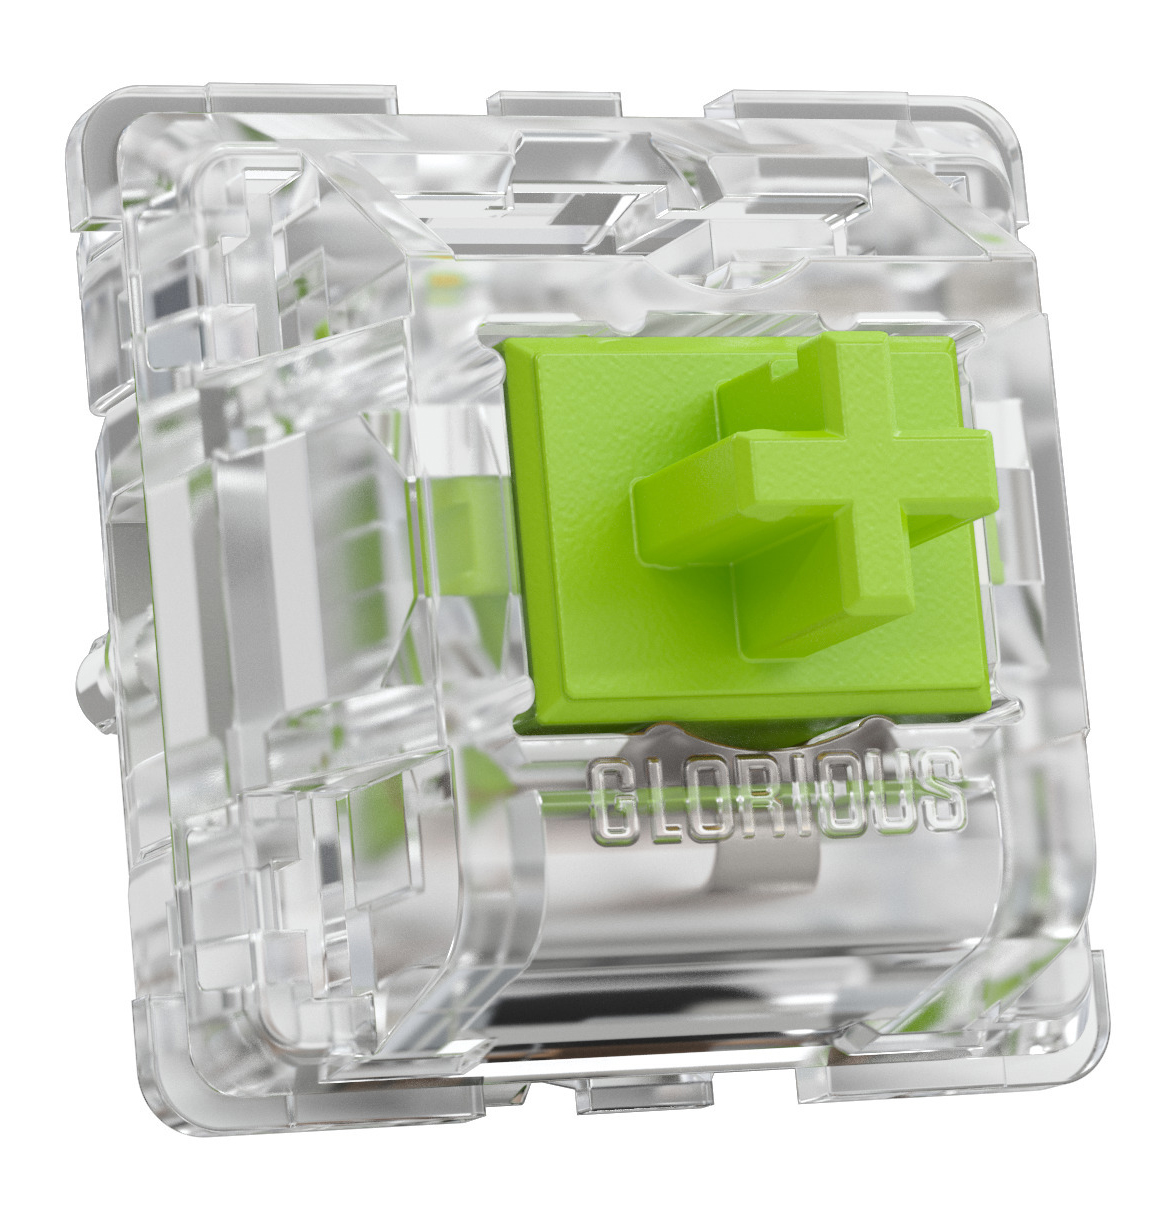 Glorious - Pack 36 Clicky Raptor Switches Lubrificados Glorious